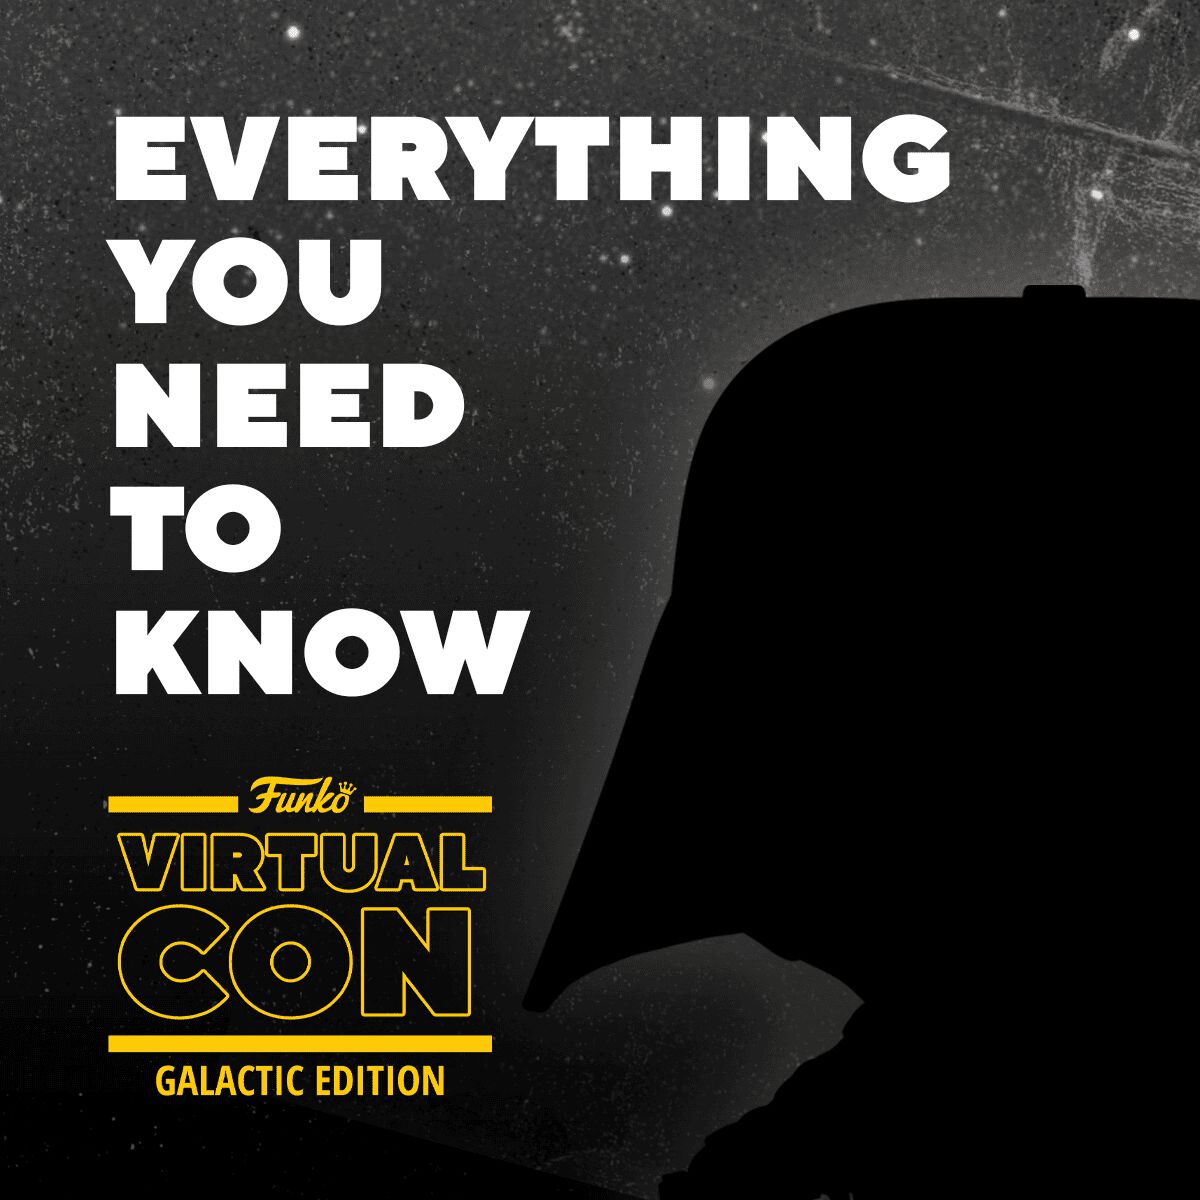 EVERYTHING YOU NEED TO KNOW: FUNKO VIRTUAL CON: GALACTIC EDITION!